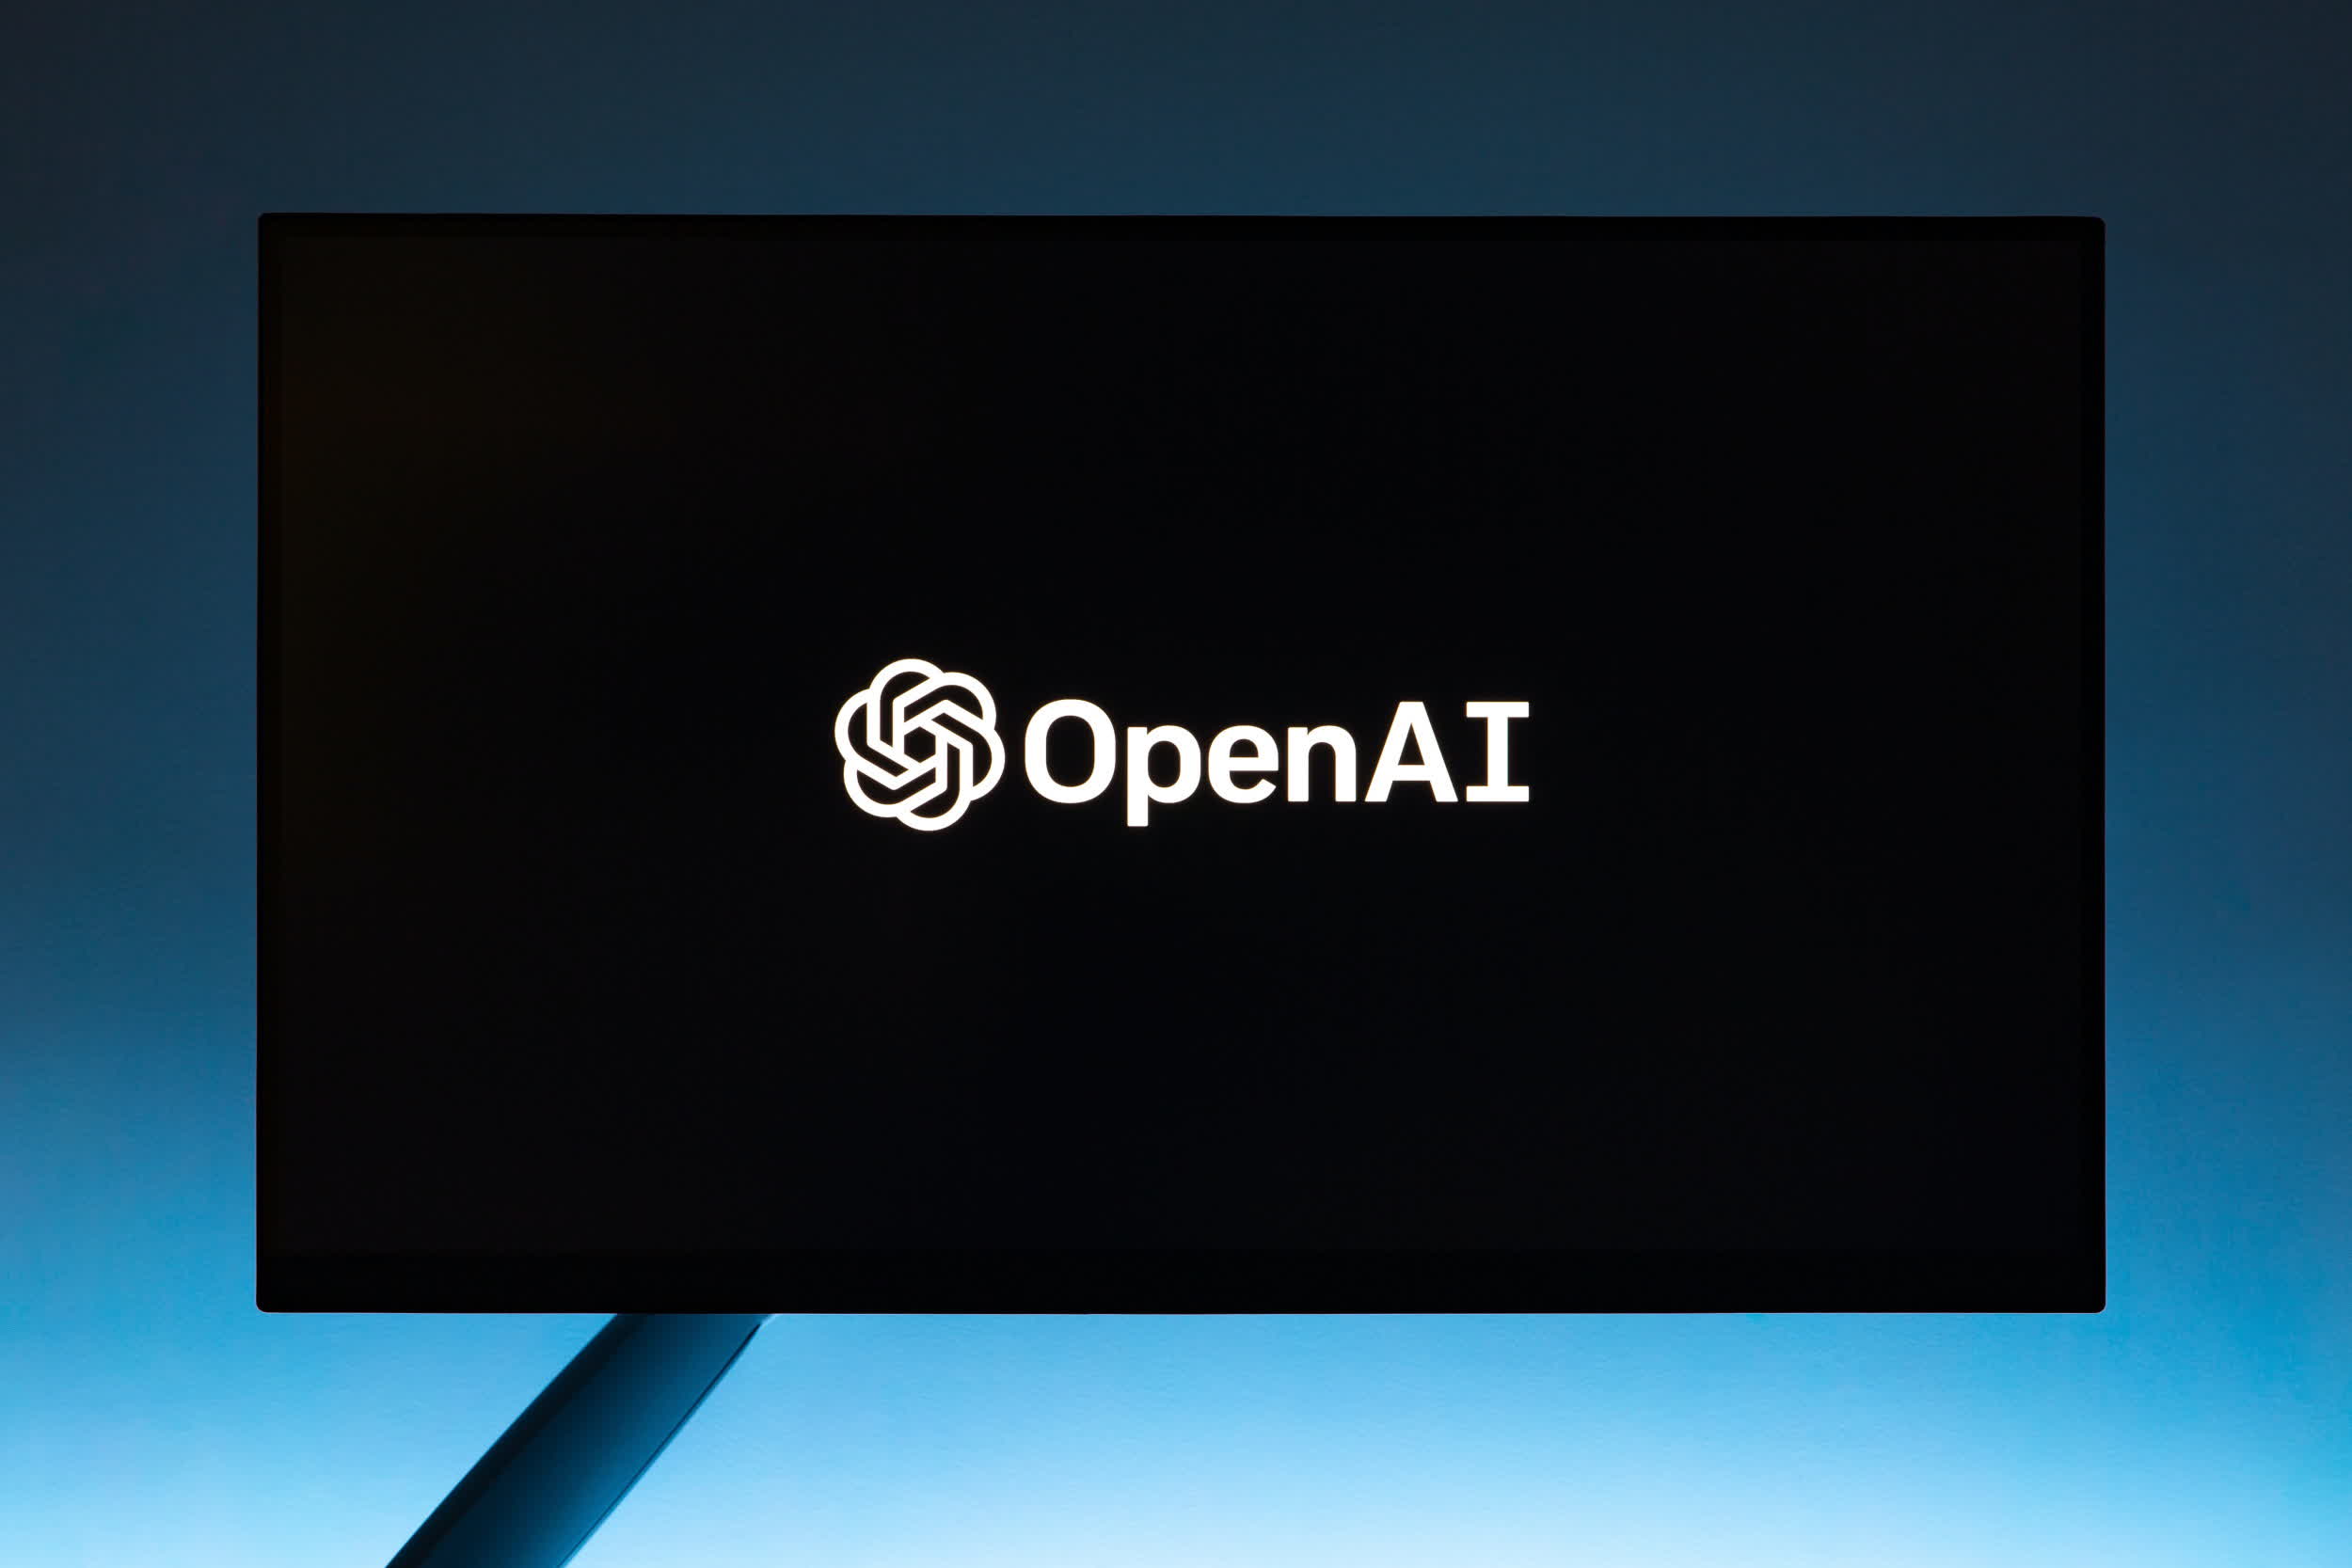 OpenAI CEO Sam Altman was seeking funds for a new AI chip company before being fired